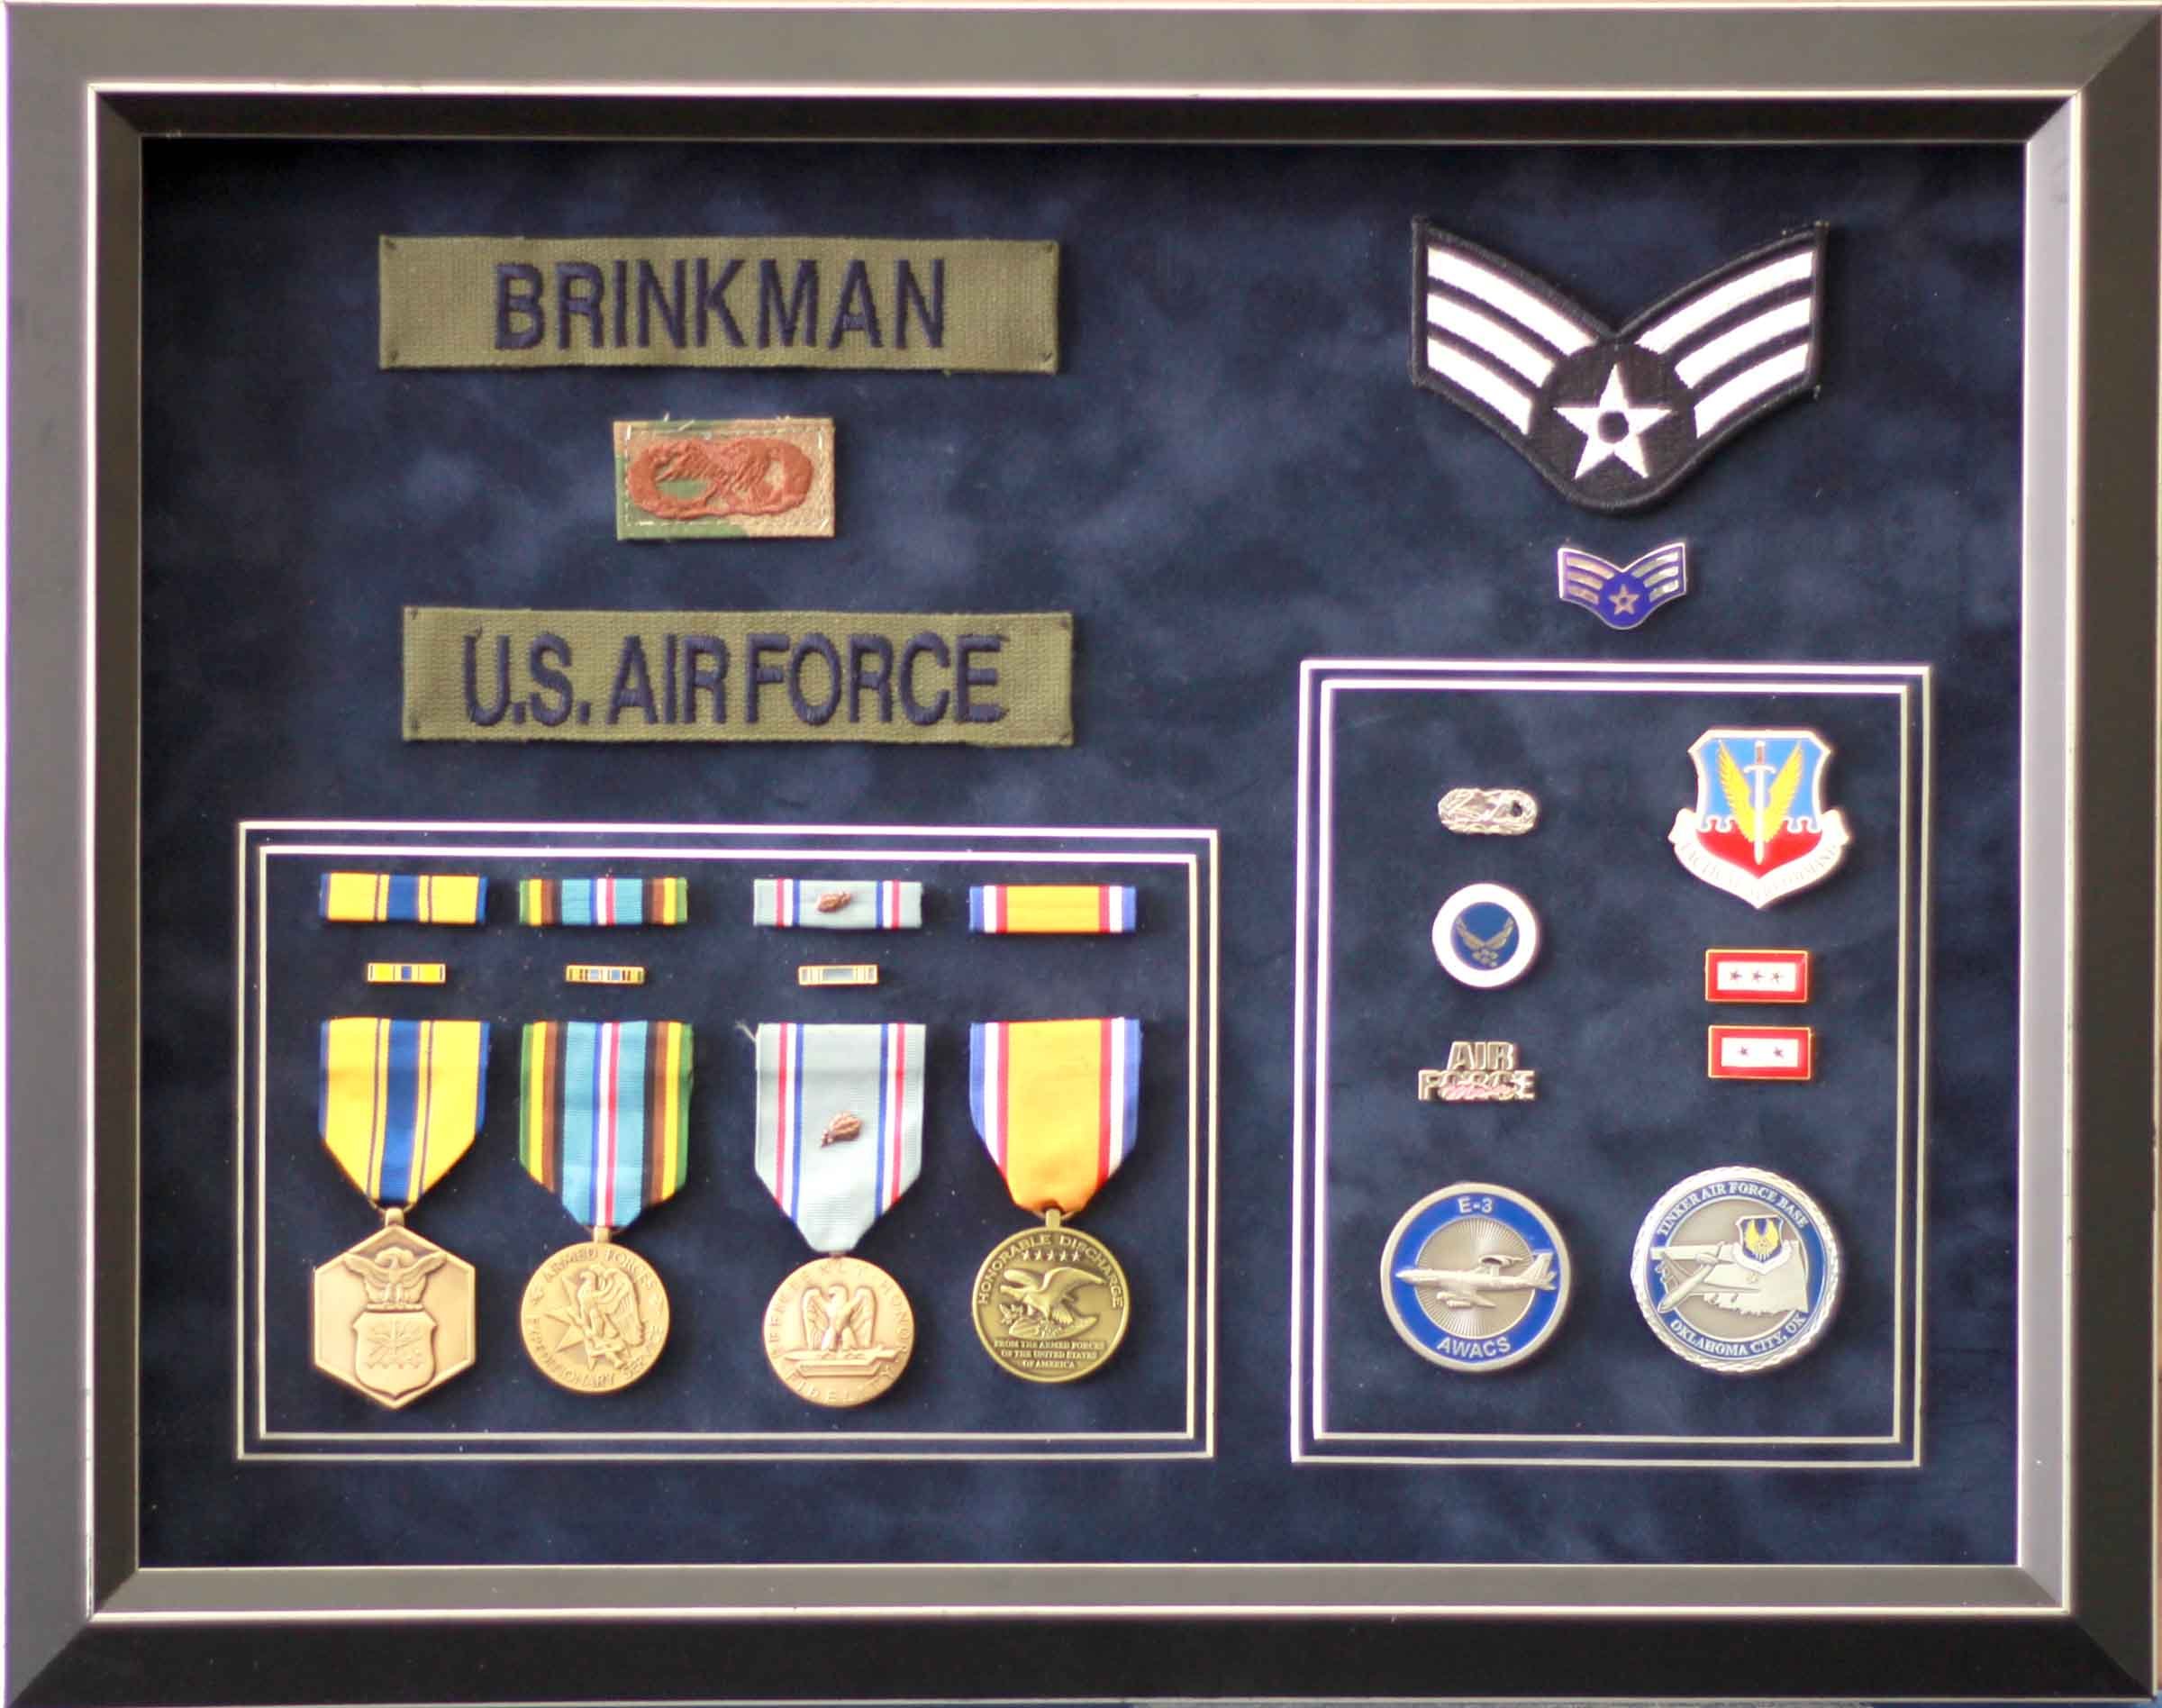 Display Case - Medals, Pins or Patches - Large, Shadow Box Display